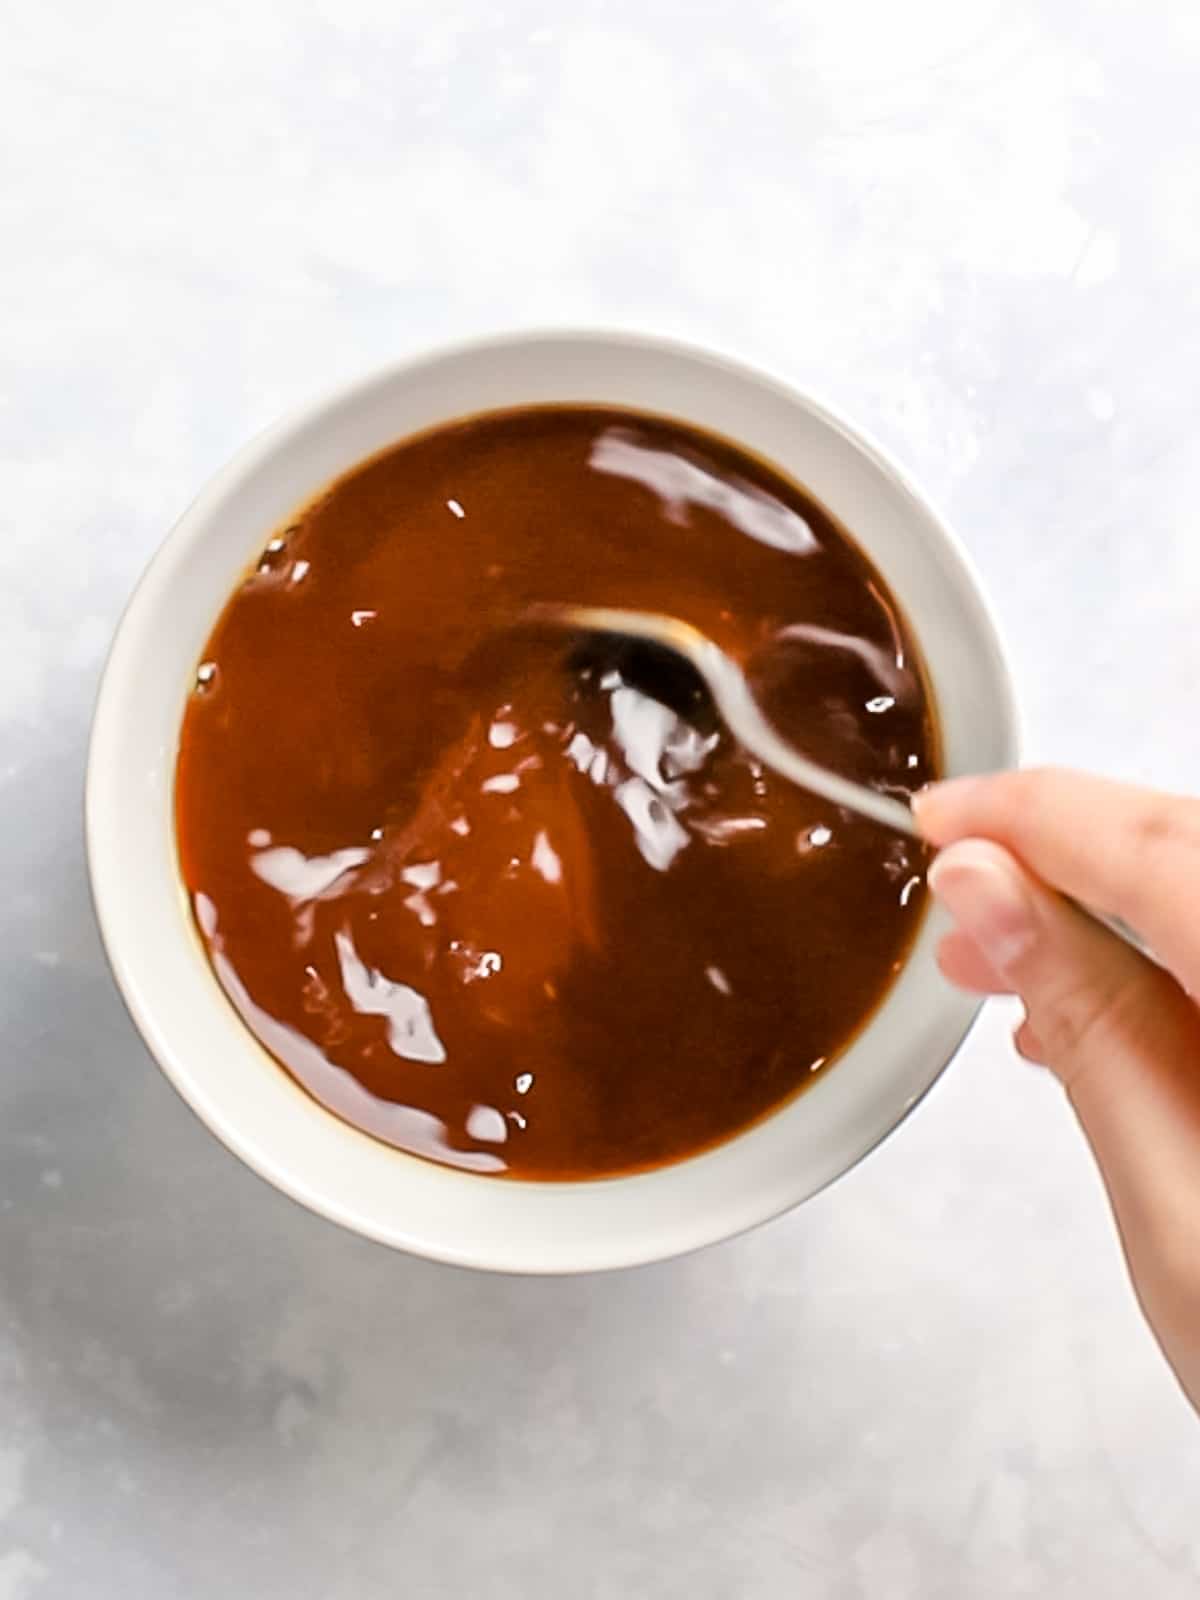 Brown gravy being mixed in a white bowl with a spoon.